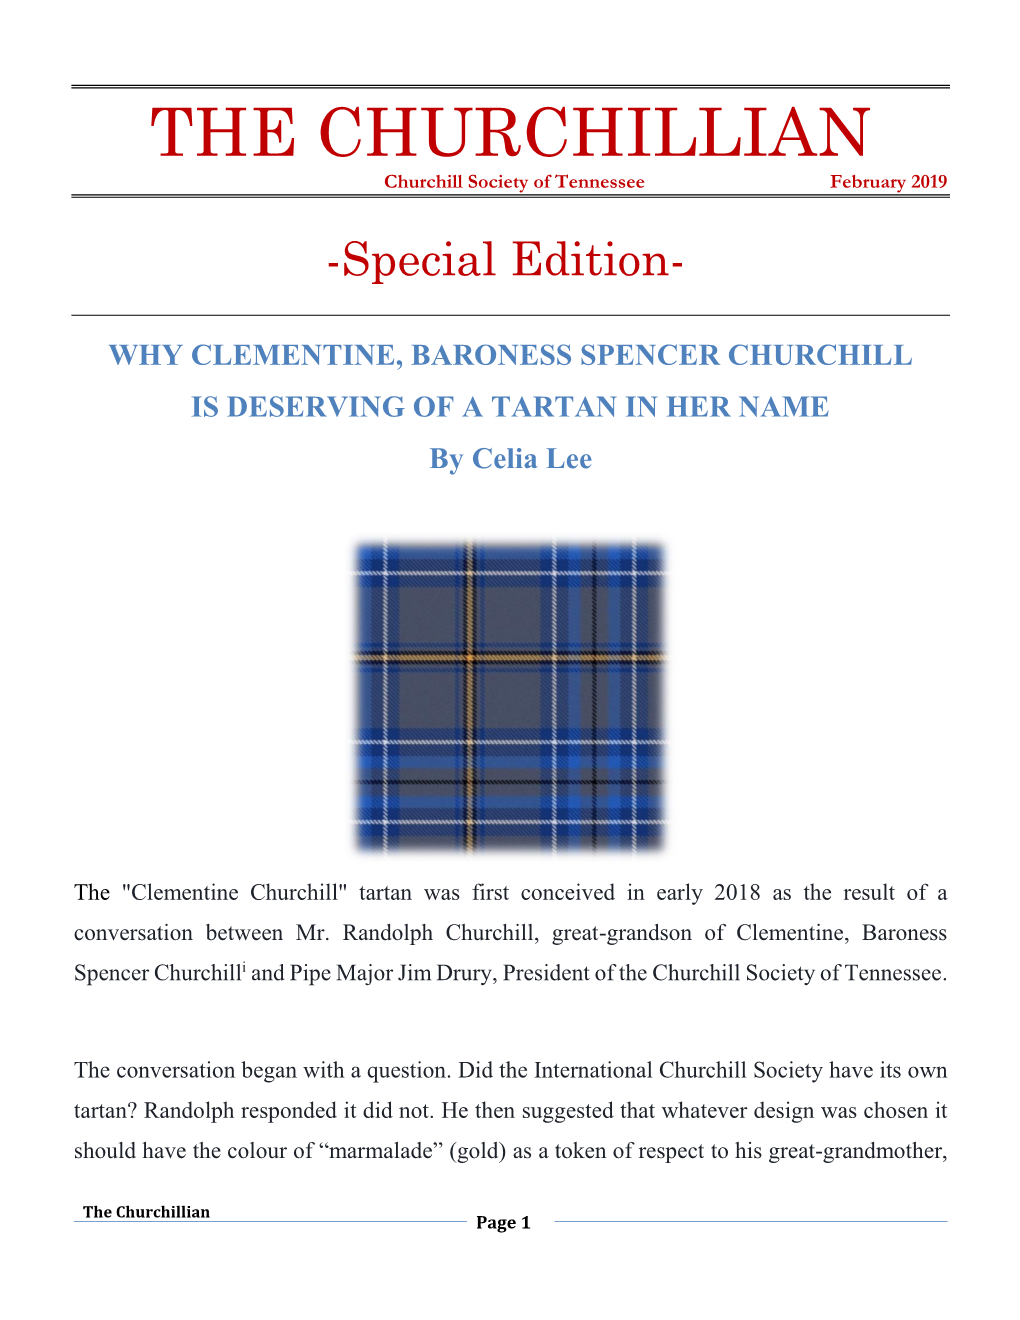 The Churchillian Clementine Tartan Special Issue